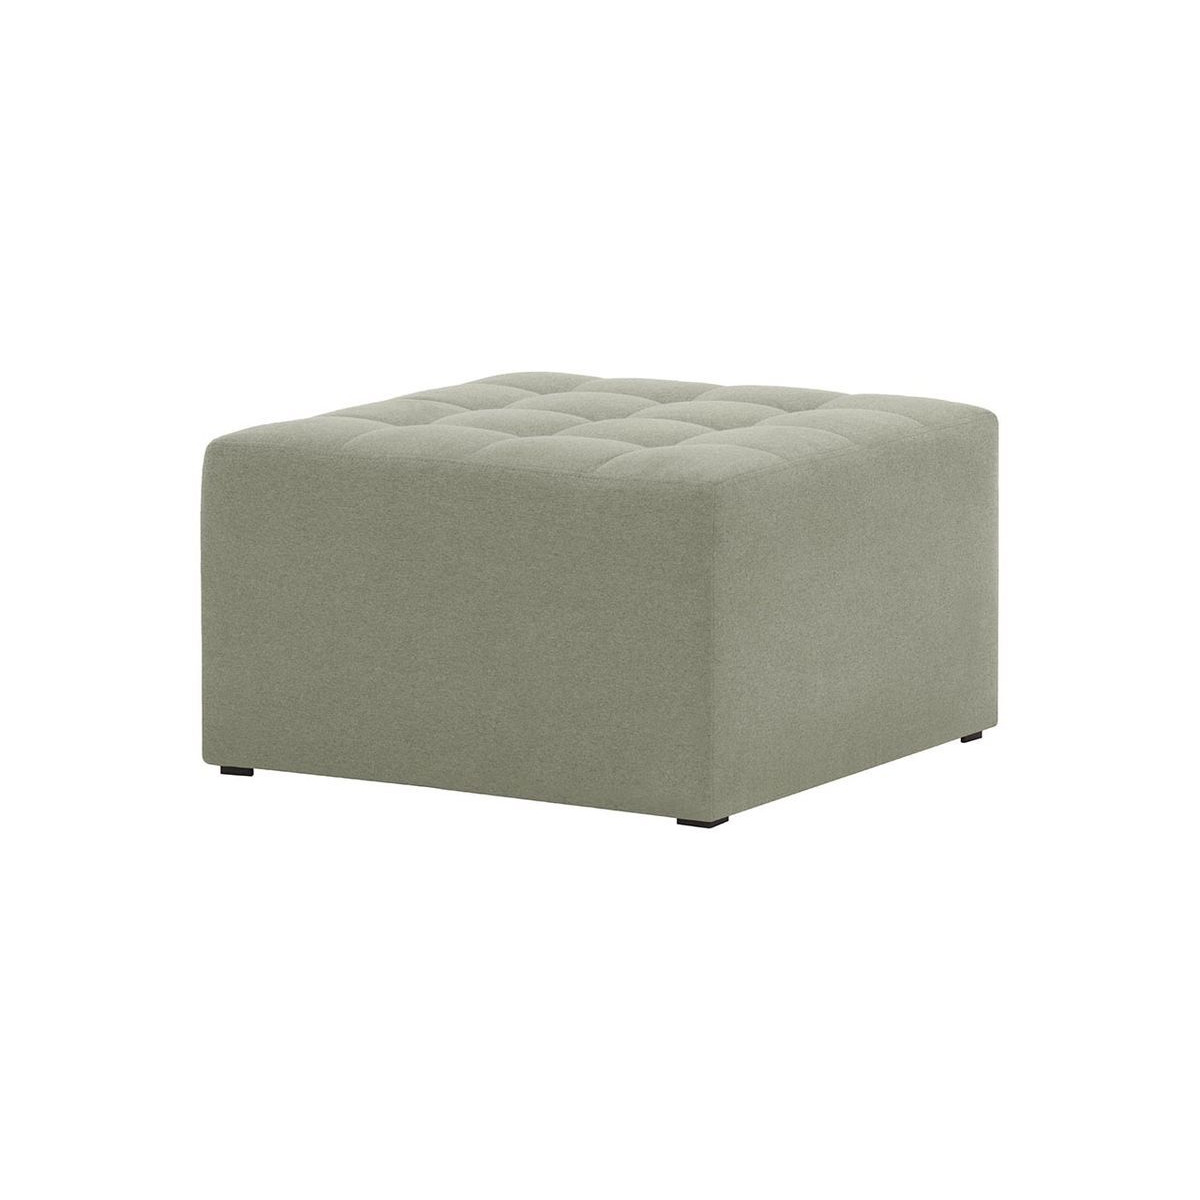 Flair Medium Square Pouffe with Stitching, grey - image 1